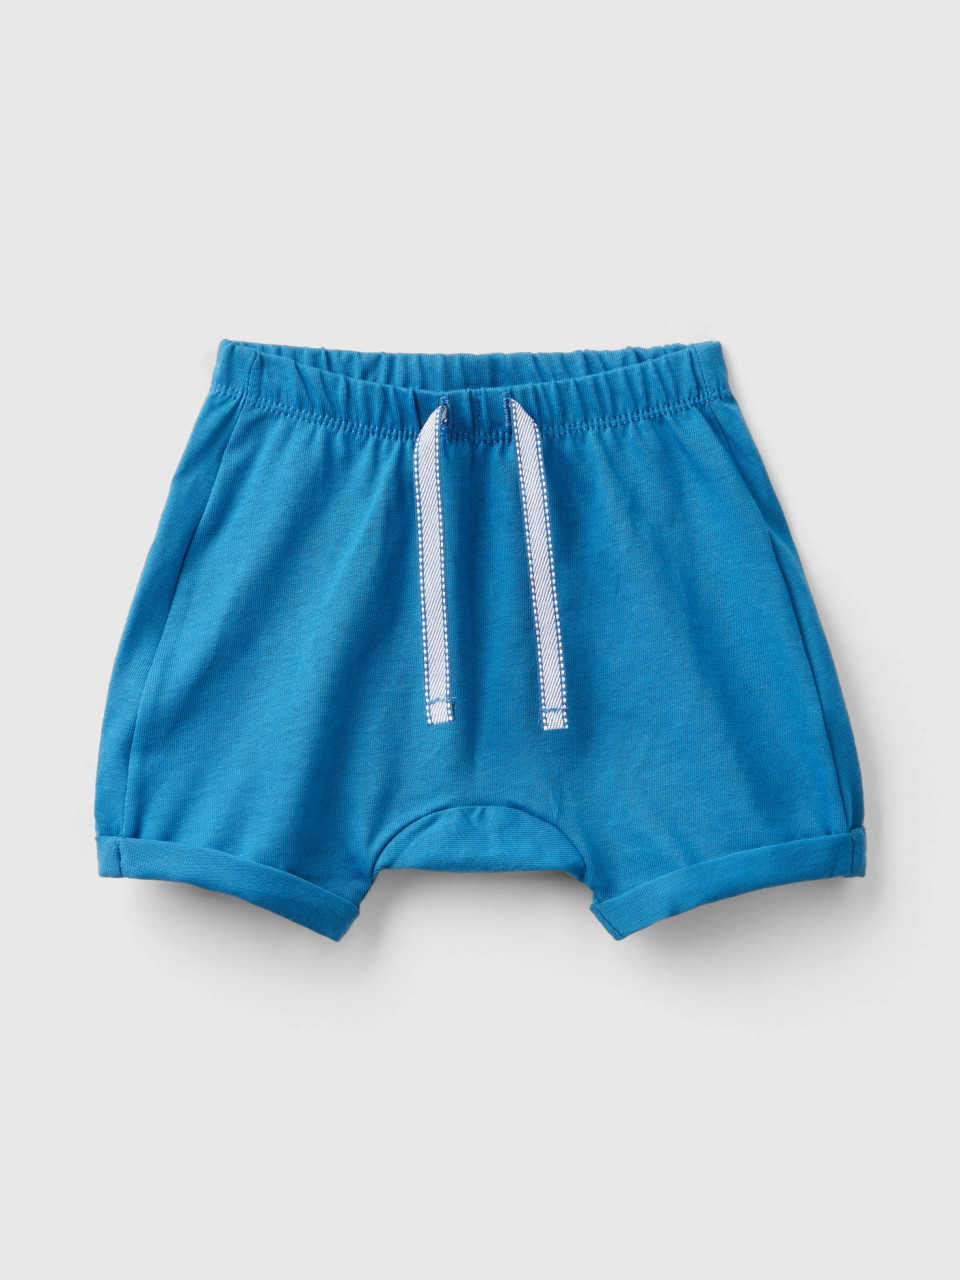 Benetton, Shorts With Patch On The Back, Blue, Kids